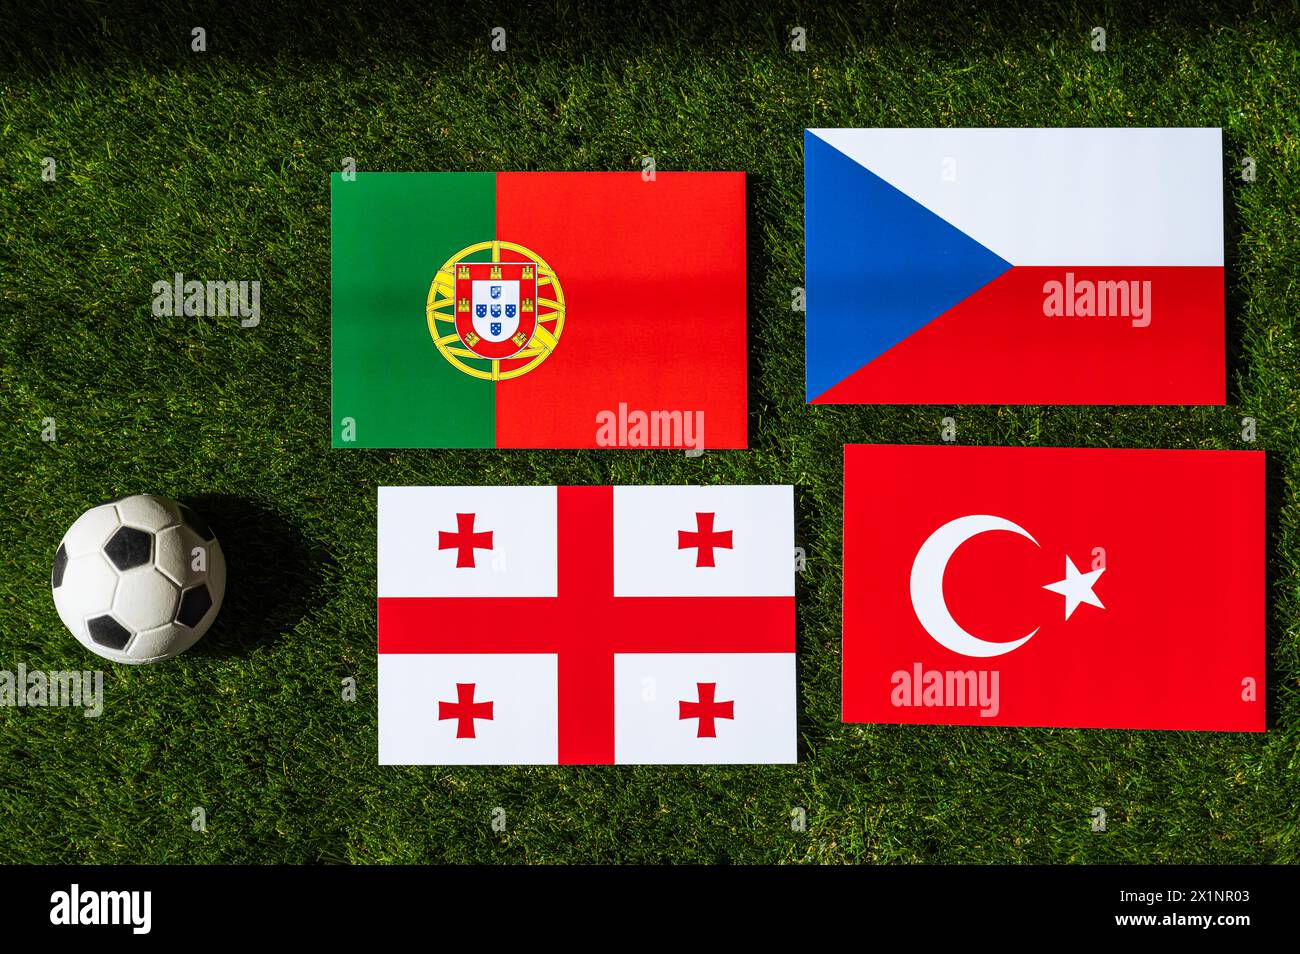 Group F at Europe football tournament in Germany in 2024. Flags of Turkey, Georgia, Portugal, Czech Republic and soccer ball on green grass Stock Photo